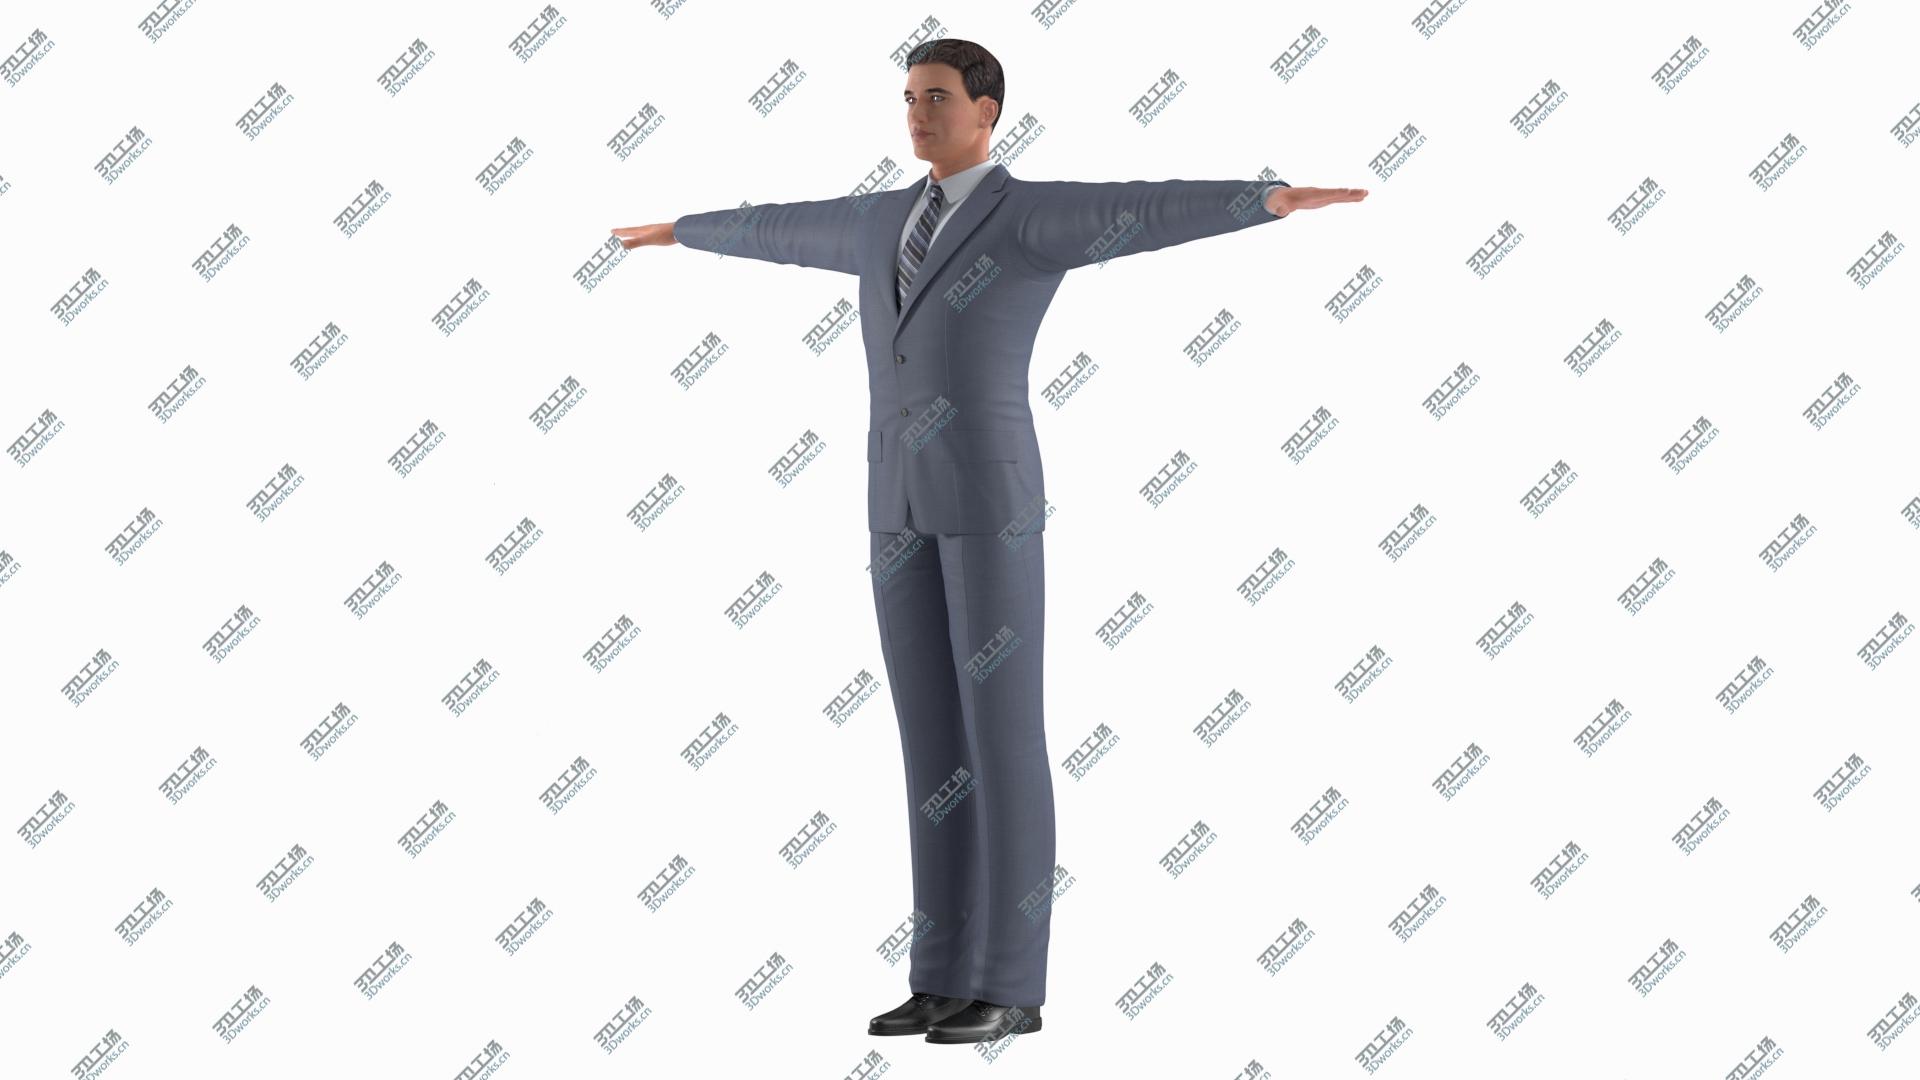 images/goods_img/20210313/3D Man in Business Suit T-Pose/2.jpg